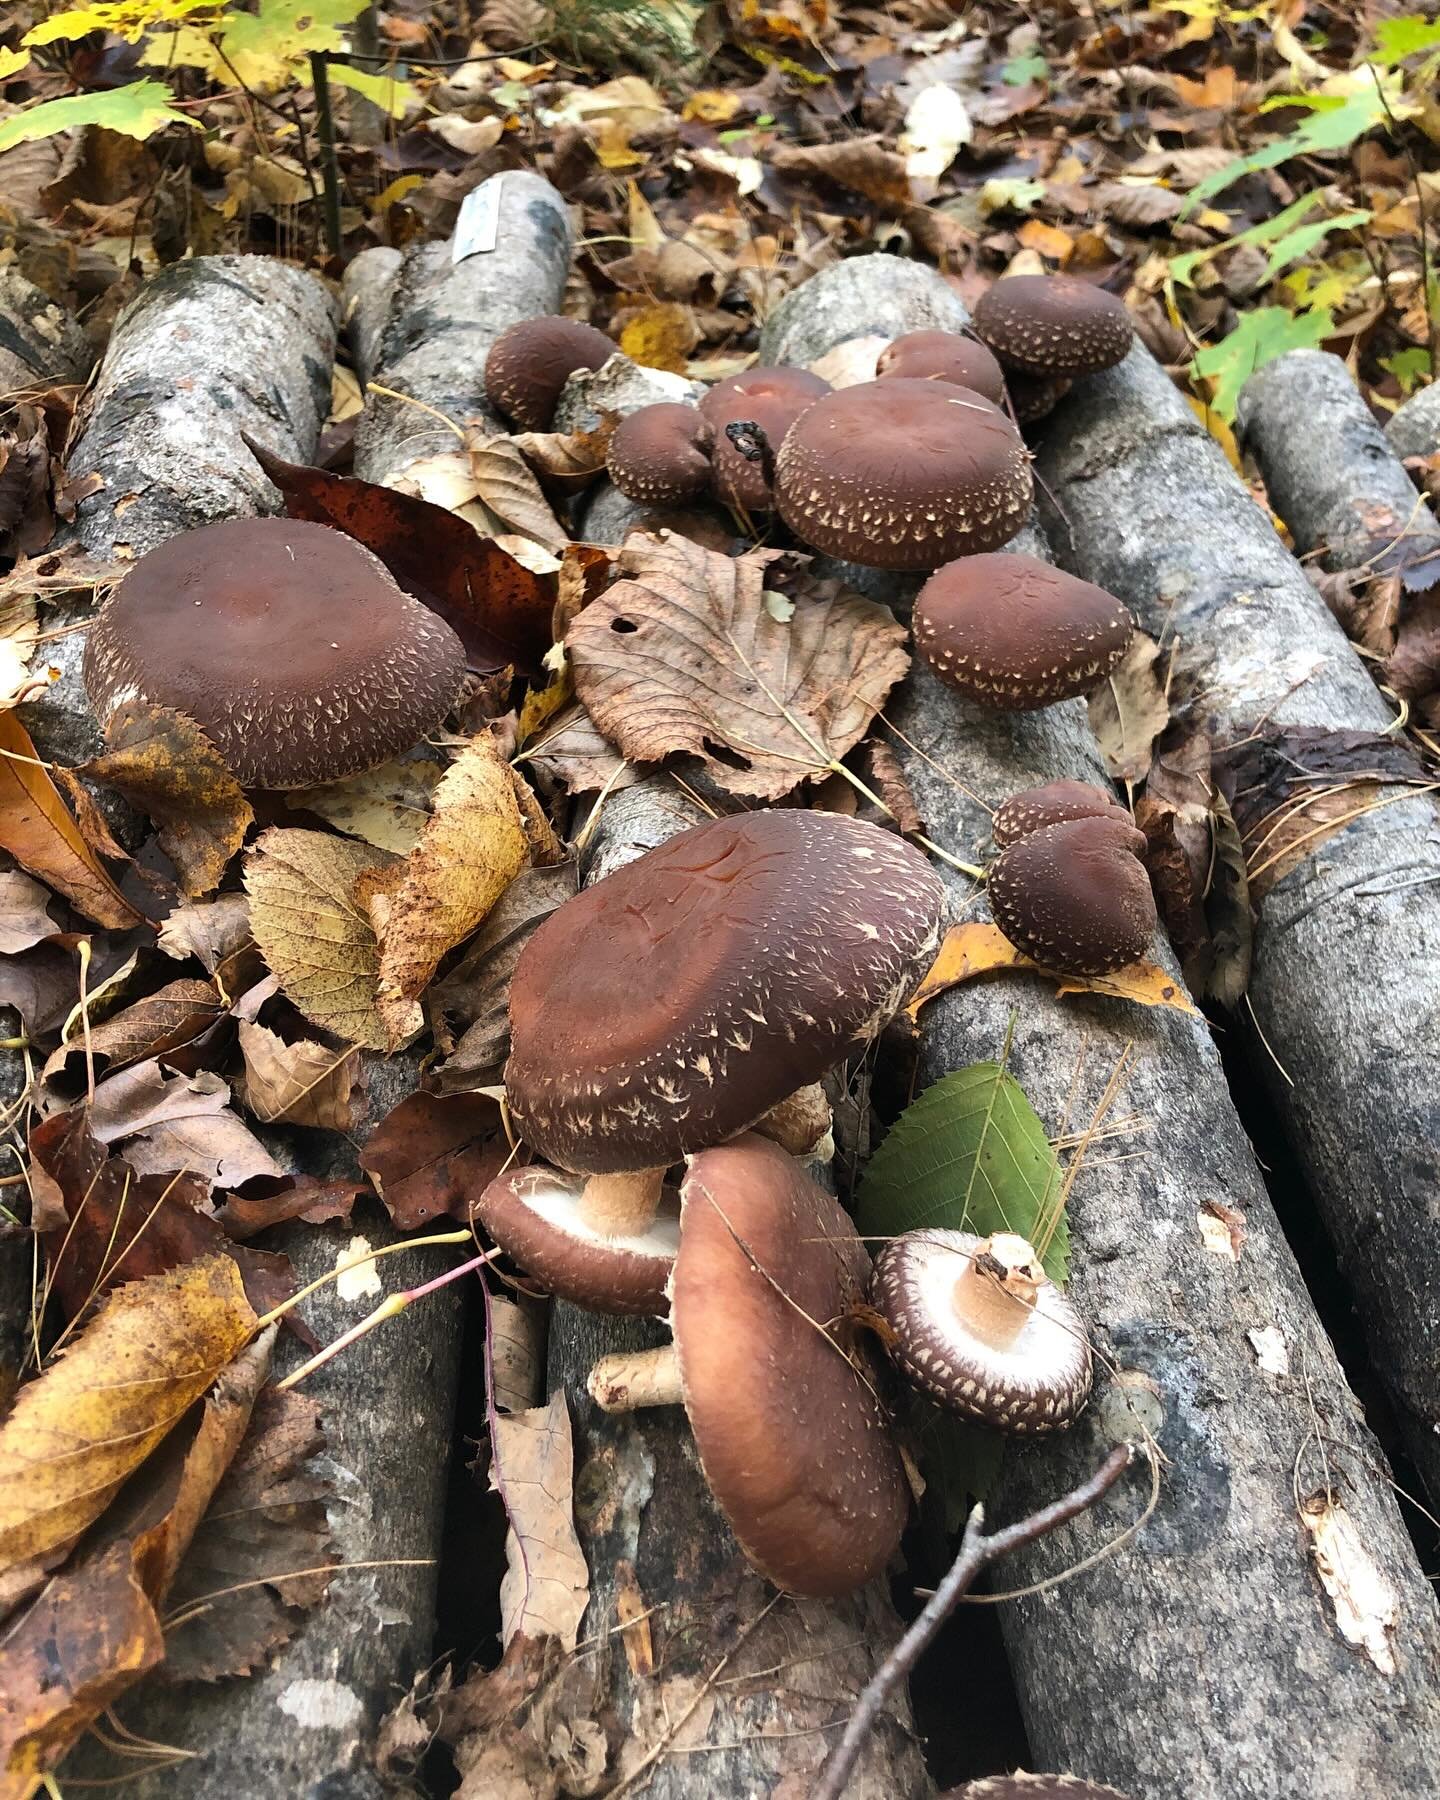 Last chance! Come join us this weekend at J&sup2; Farms for a &ldquo;mushroom log&rdquo; making workshop! Sessions Saturday and Sunday. Link in bio to sign up!

The workshop will feature an introductory mycology lecture and detailed instructions for 